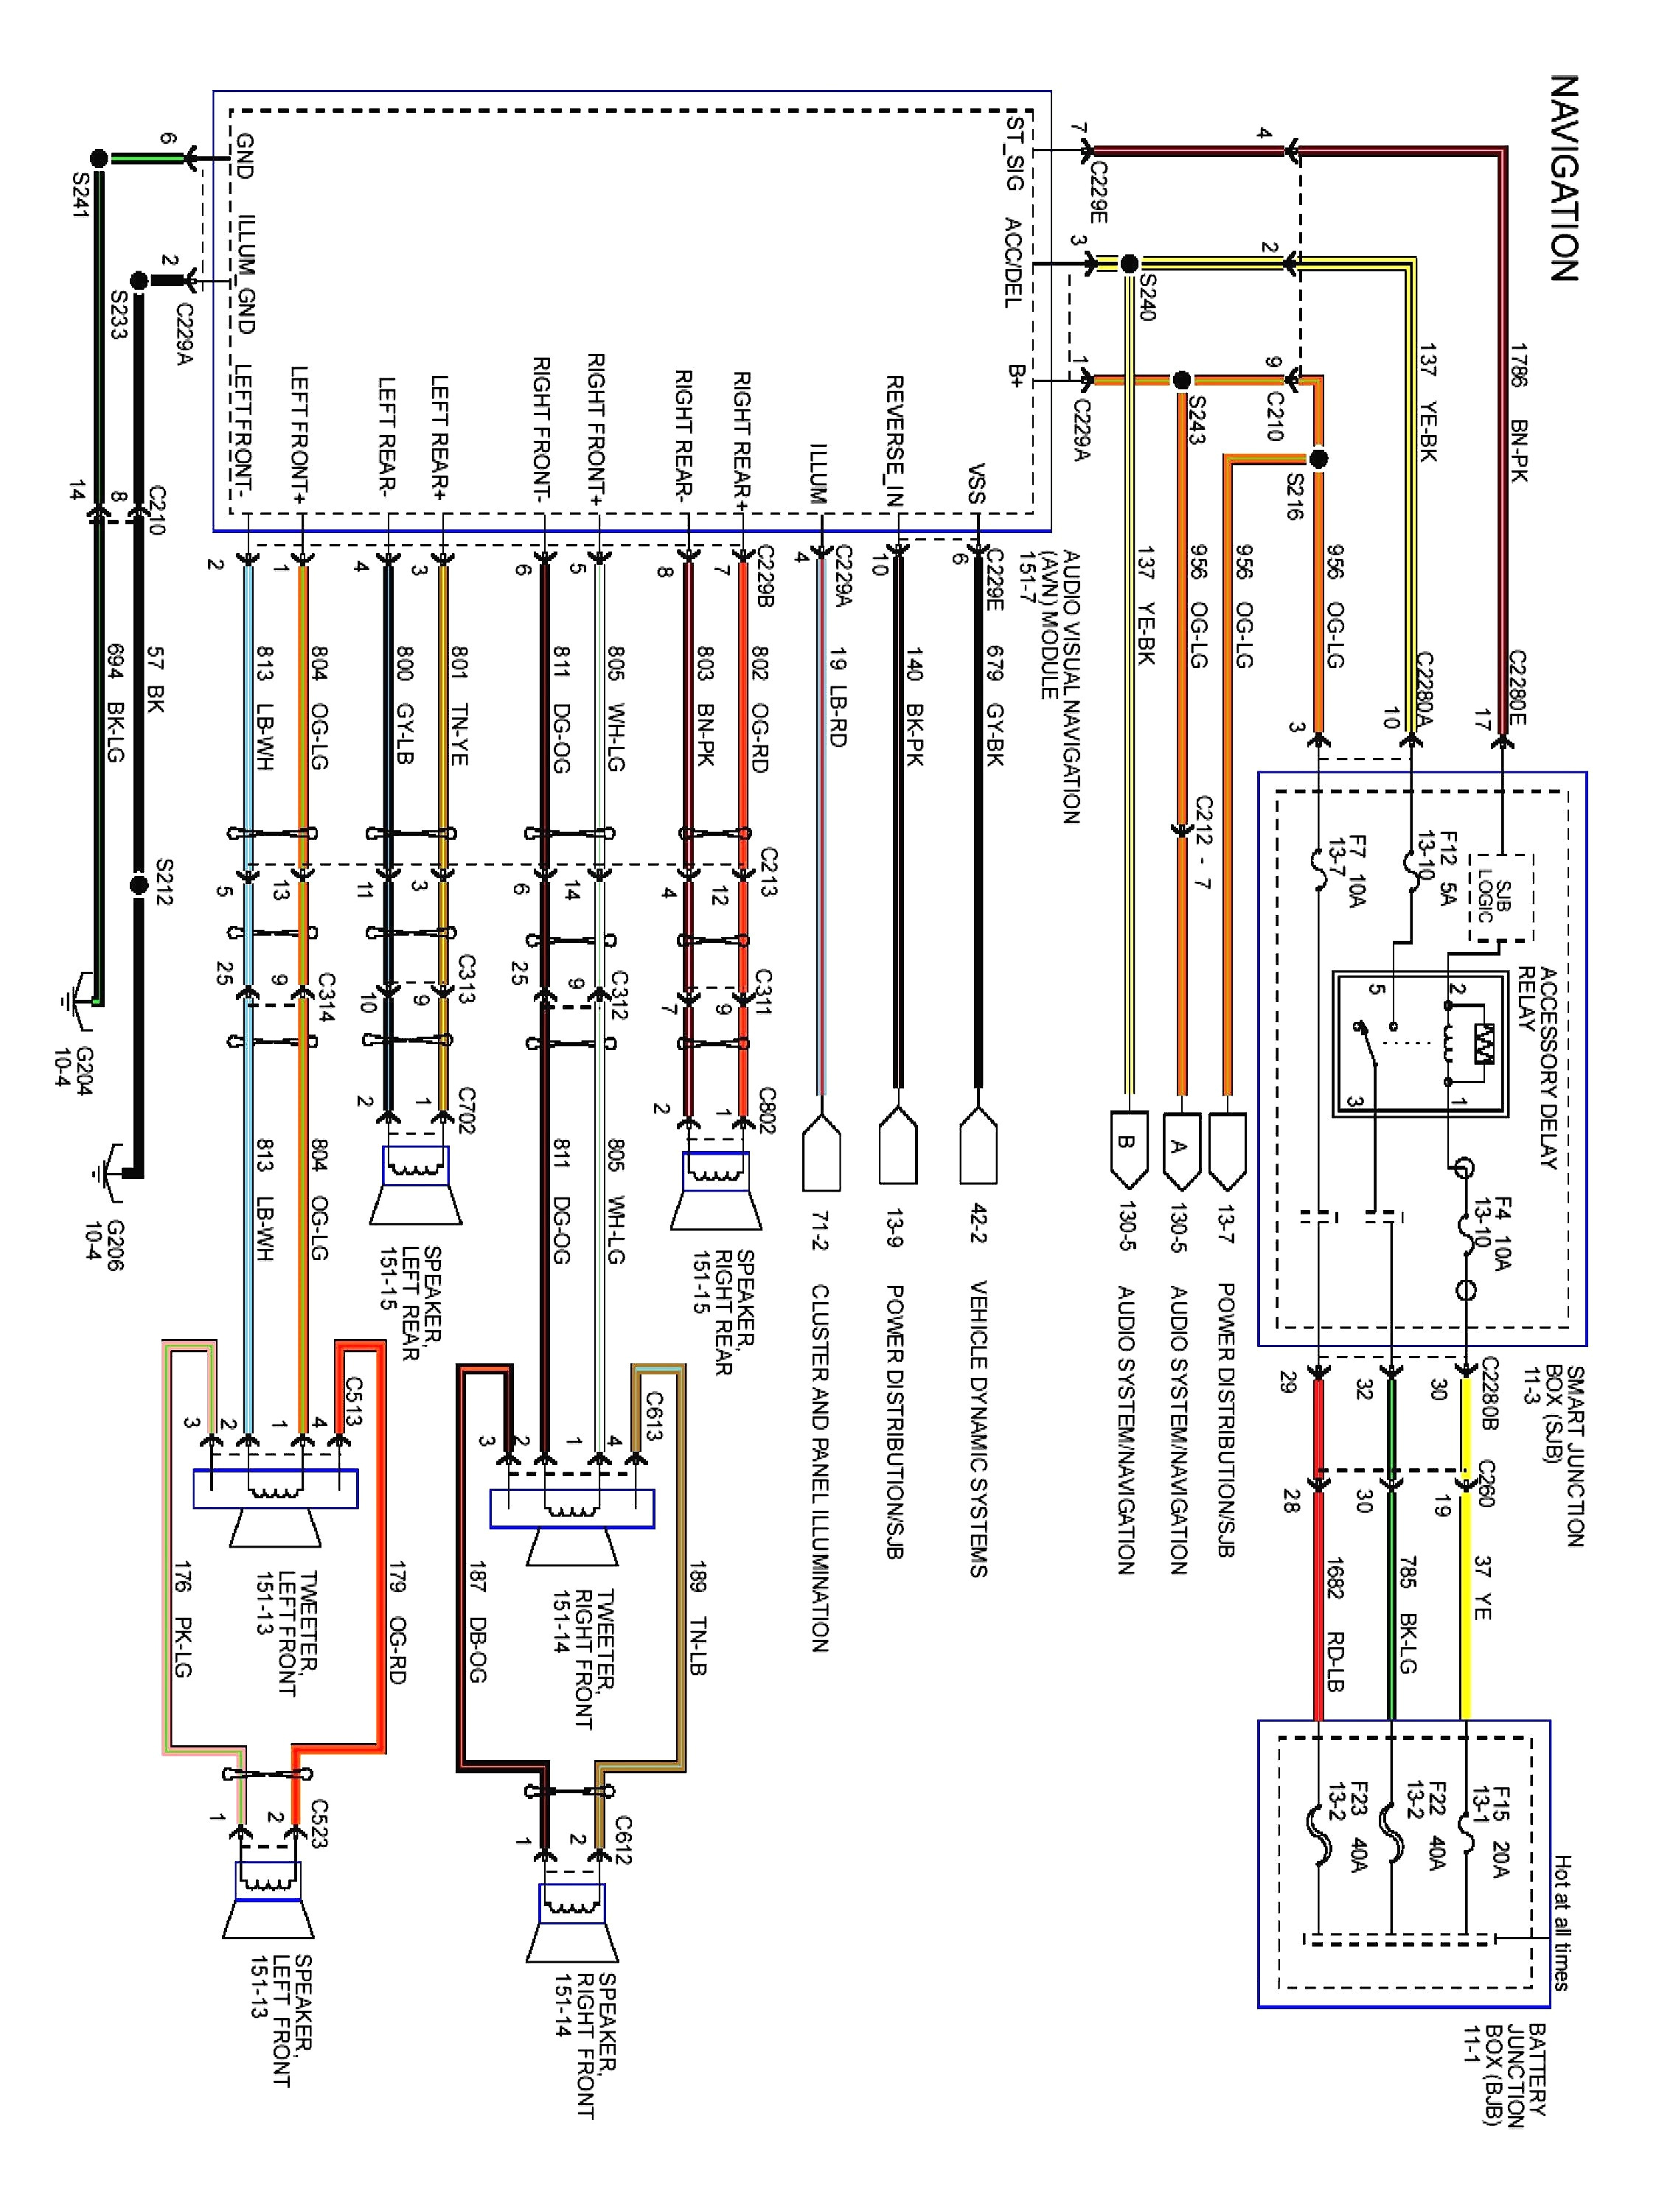 wiring diagram for 2008 ford escape hybrid search wiring diagram wiring diagram for 2008 ford escape hybrid